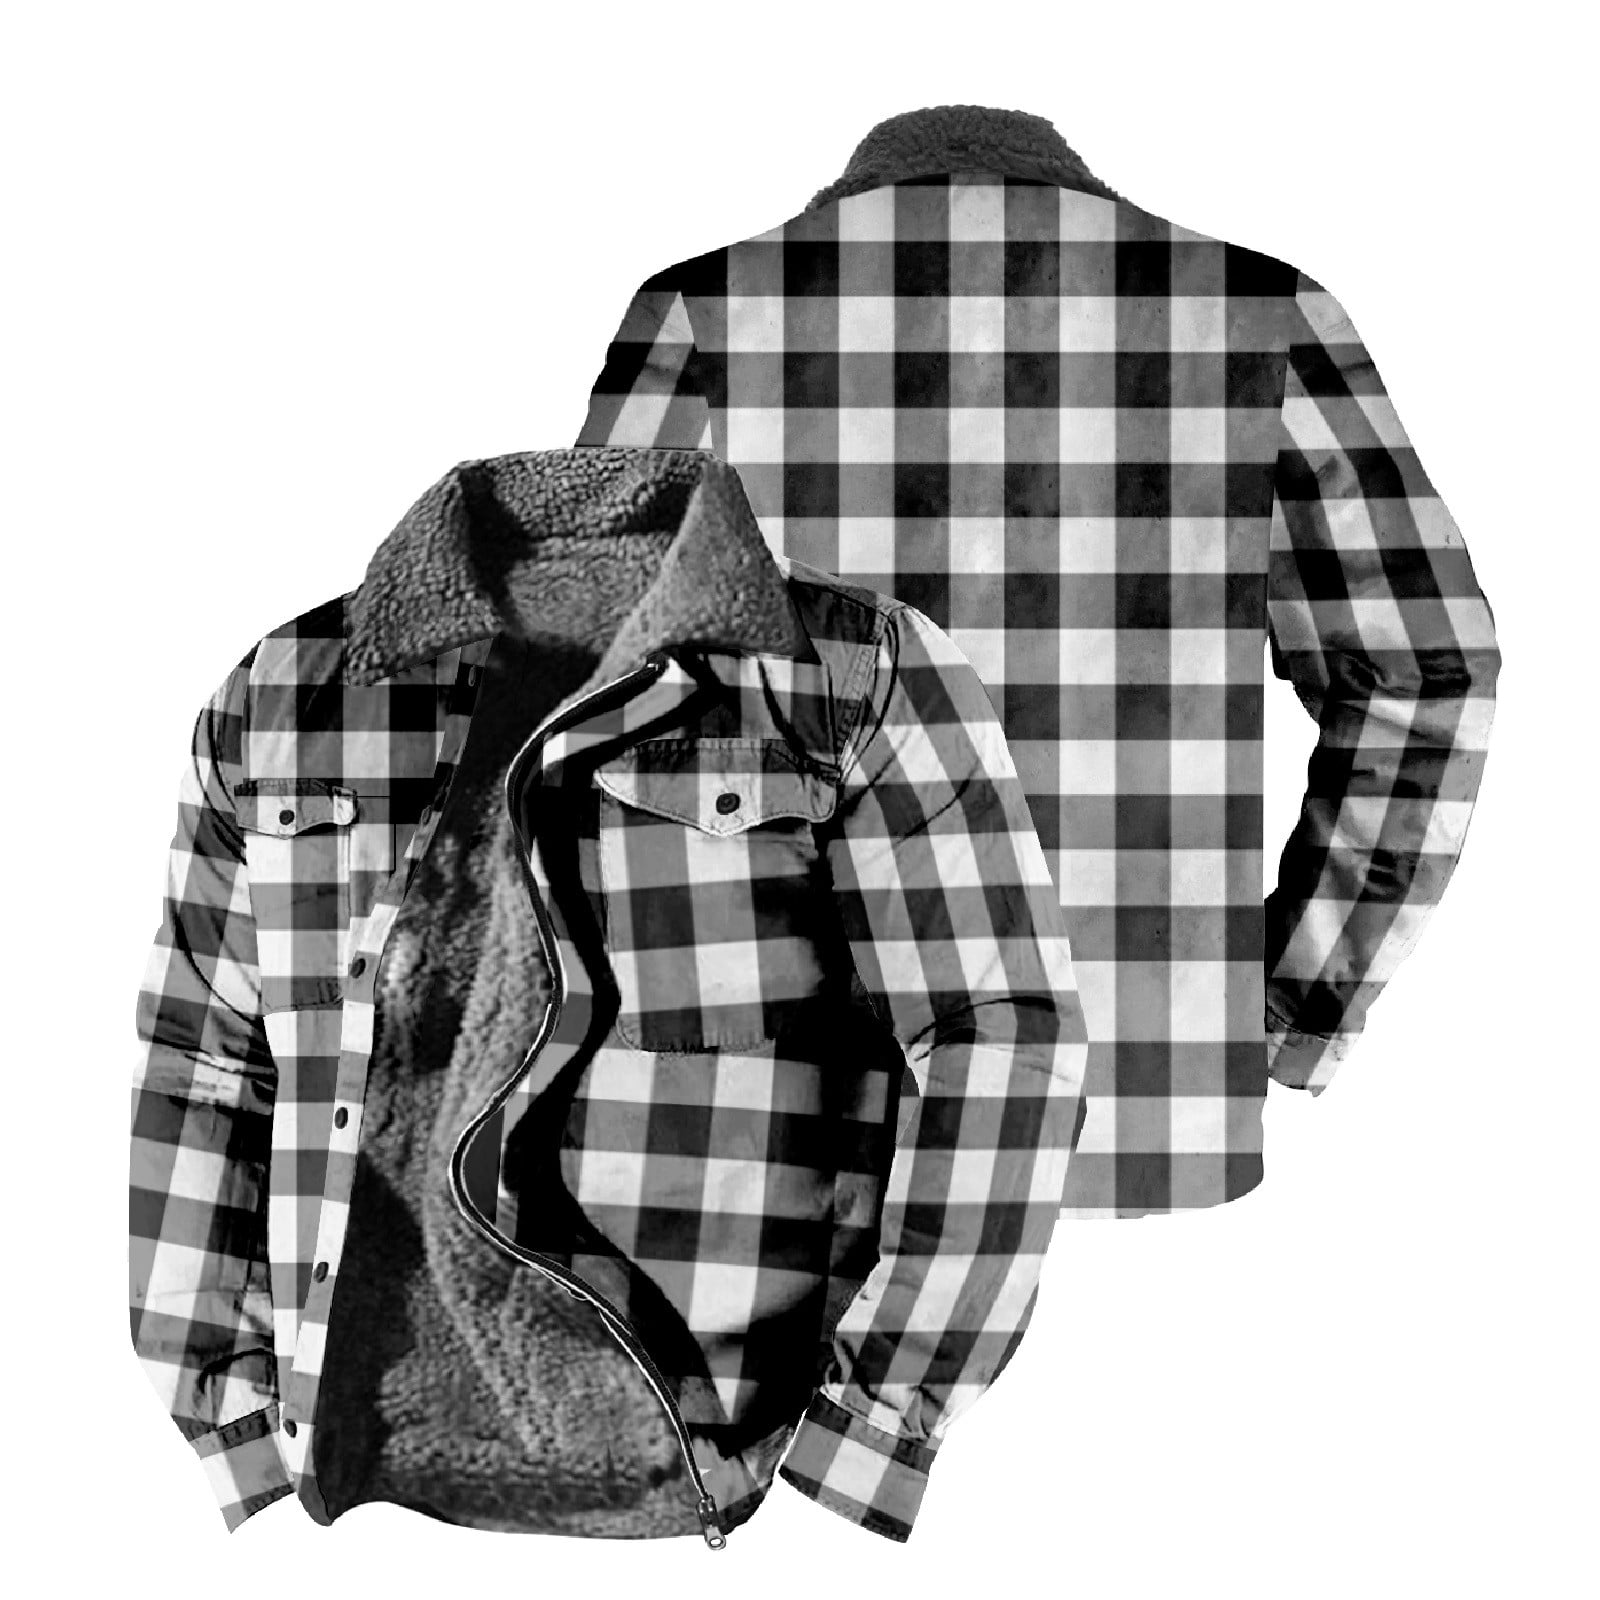 Gyouwnll Men's Warm Lined Wool Plaid Shirt Jacket - Classic Style for ...